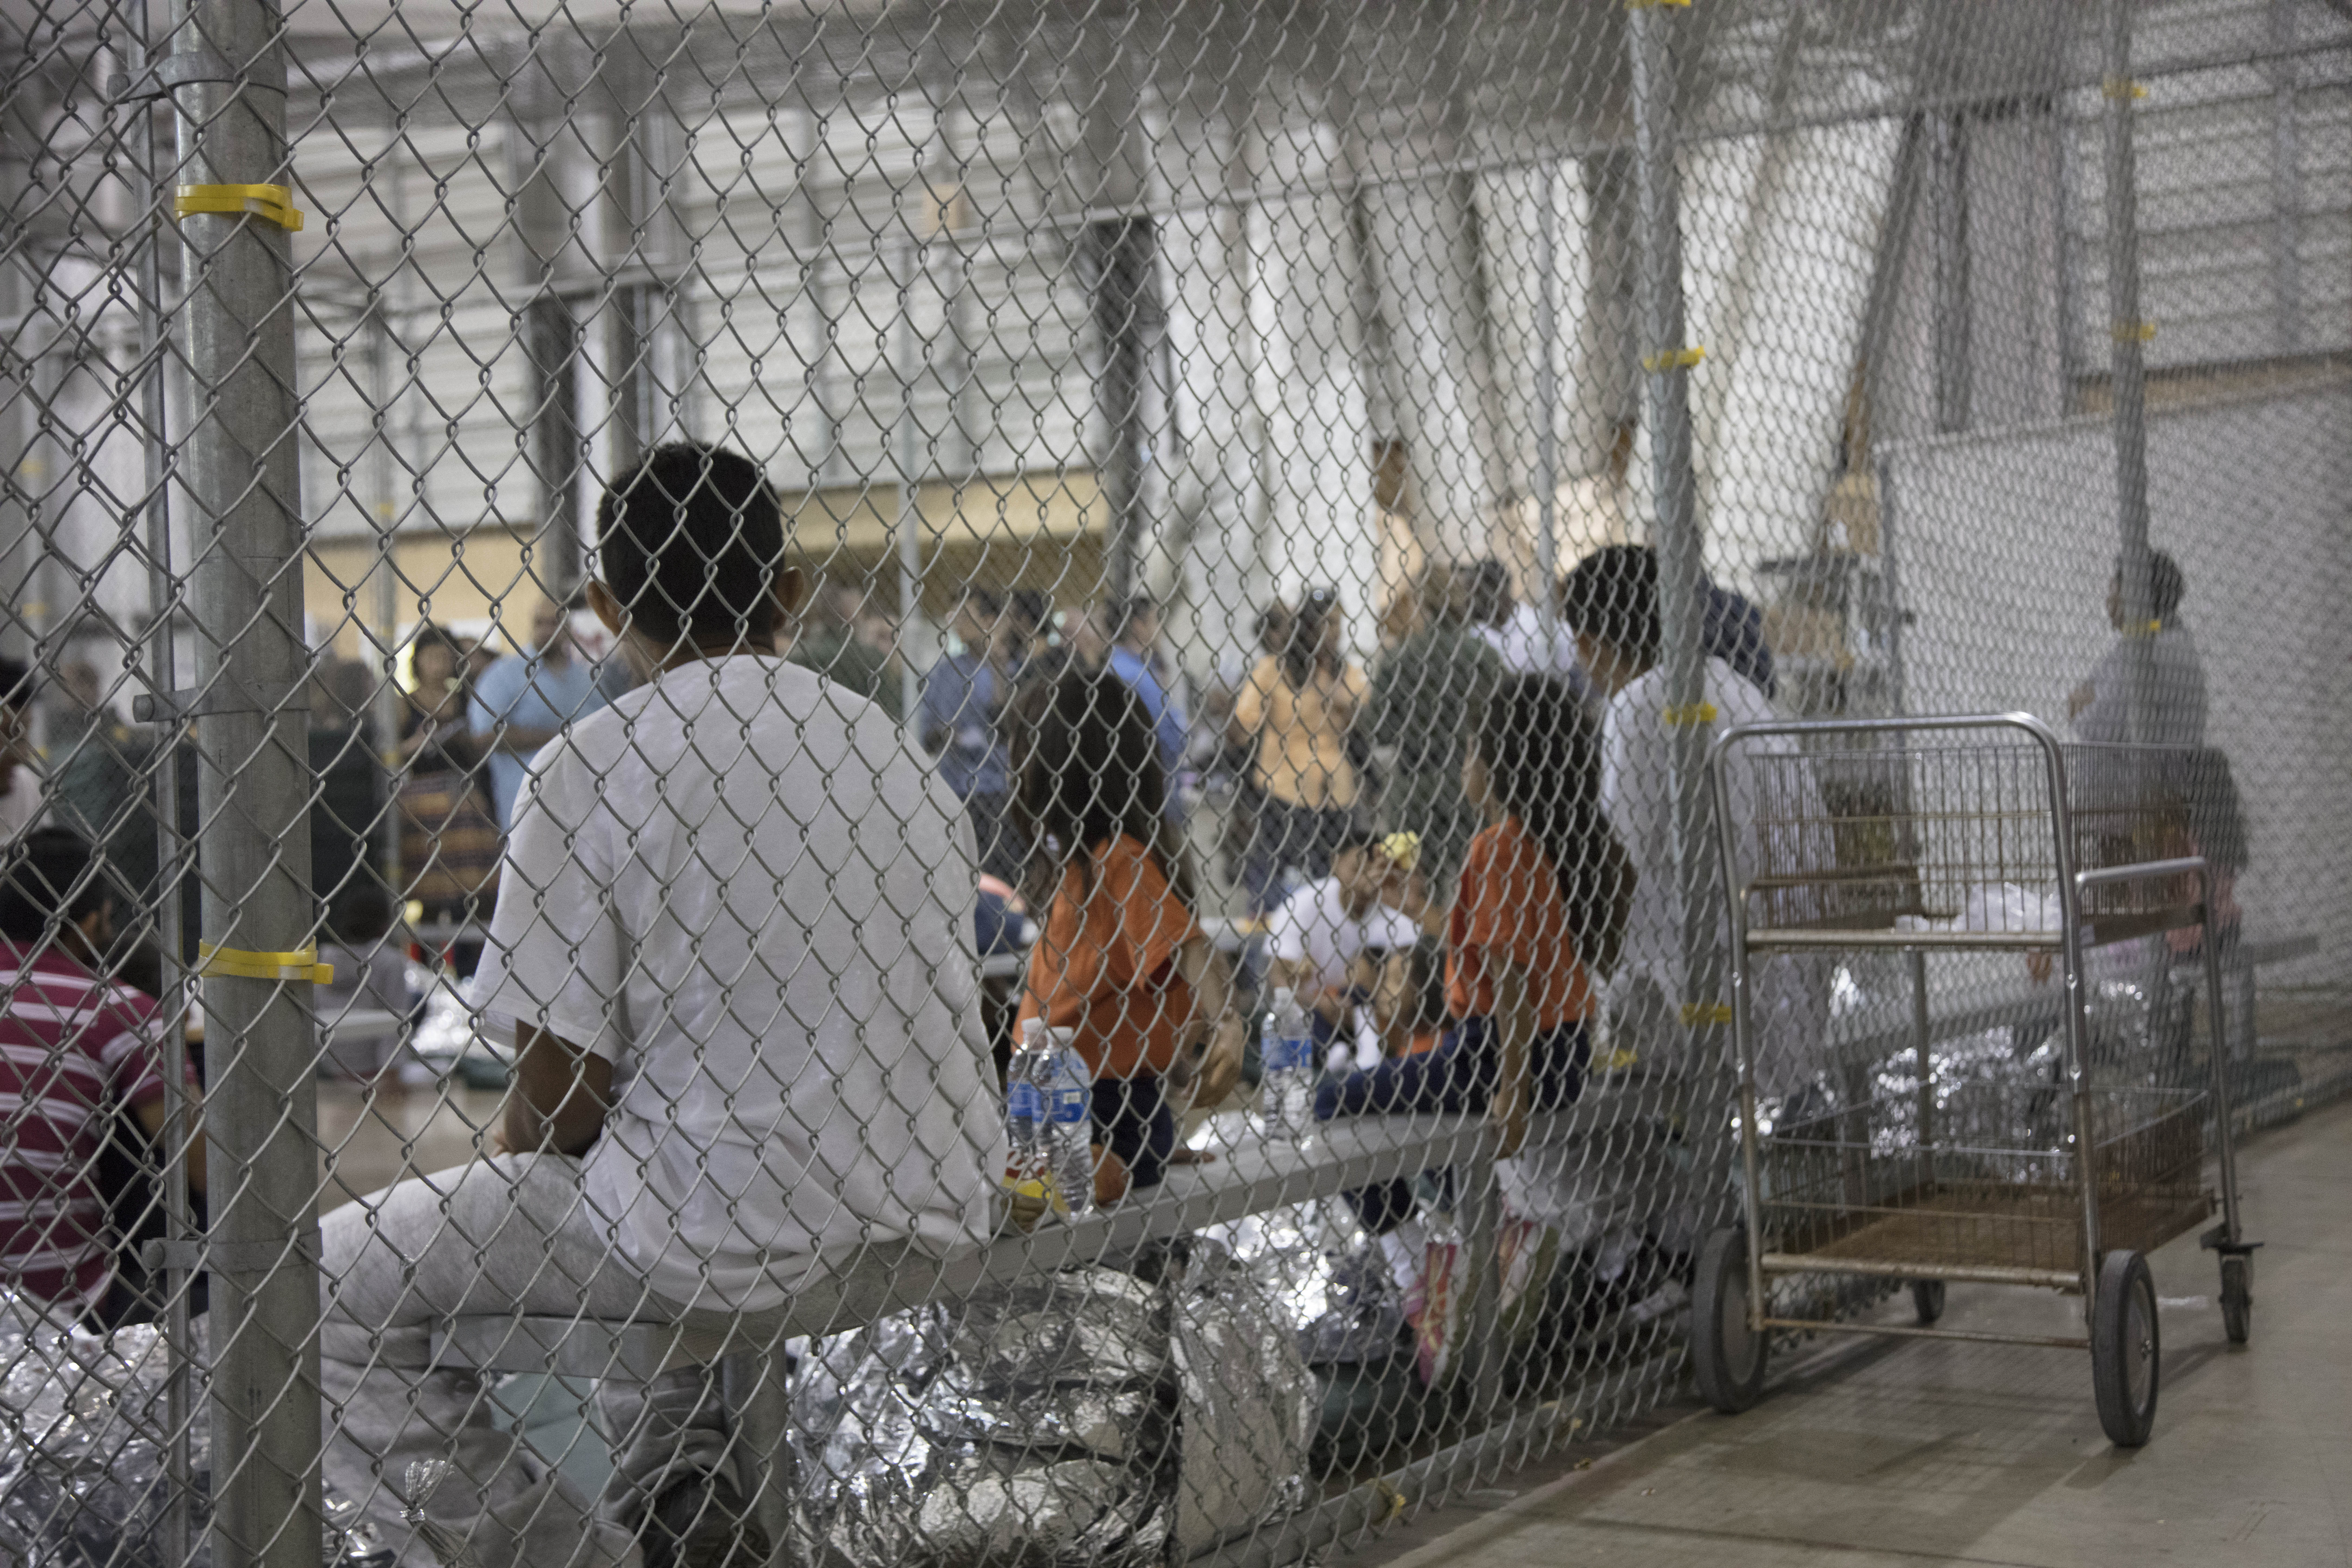 ACLU pushes for protection of inmates and at-risk immigrants amid coronavirus outbreak